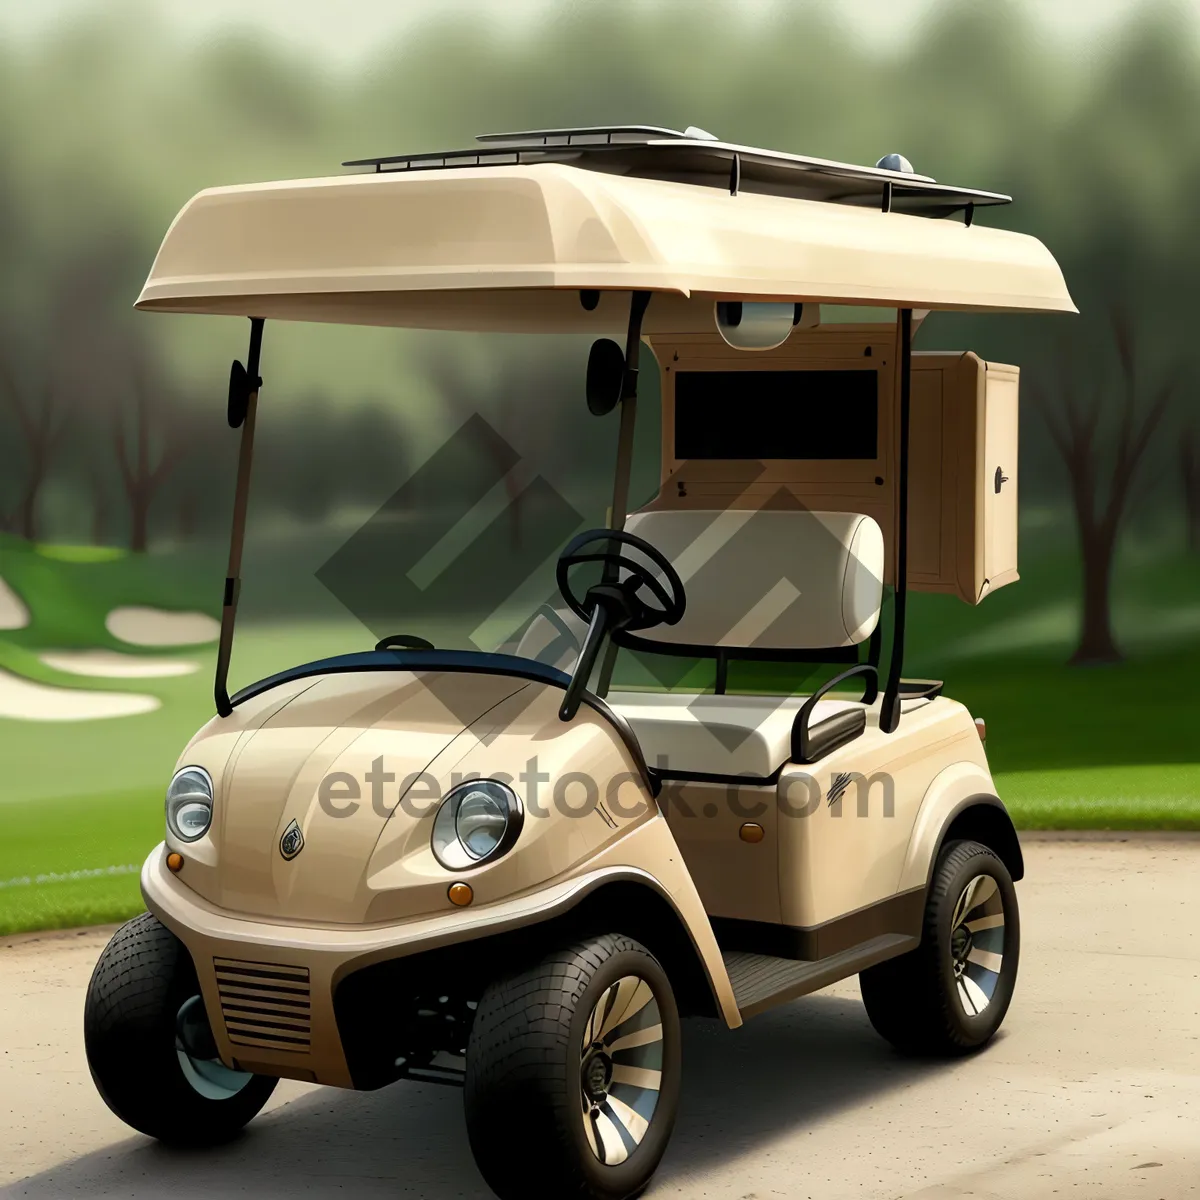 Picture of Golf Cart on Green Course